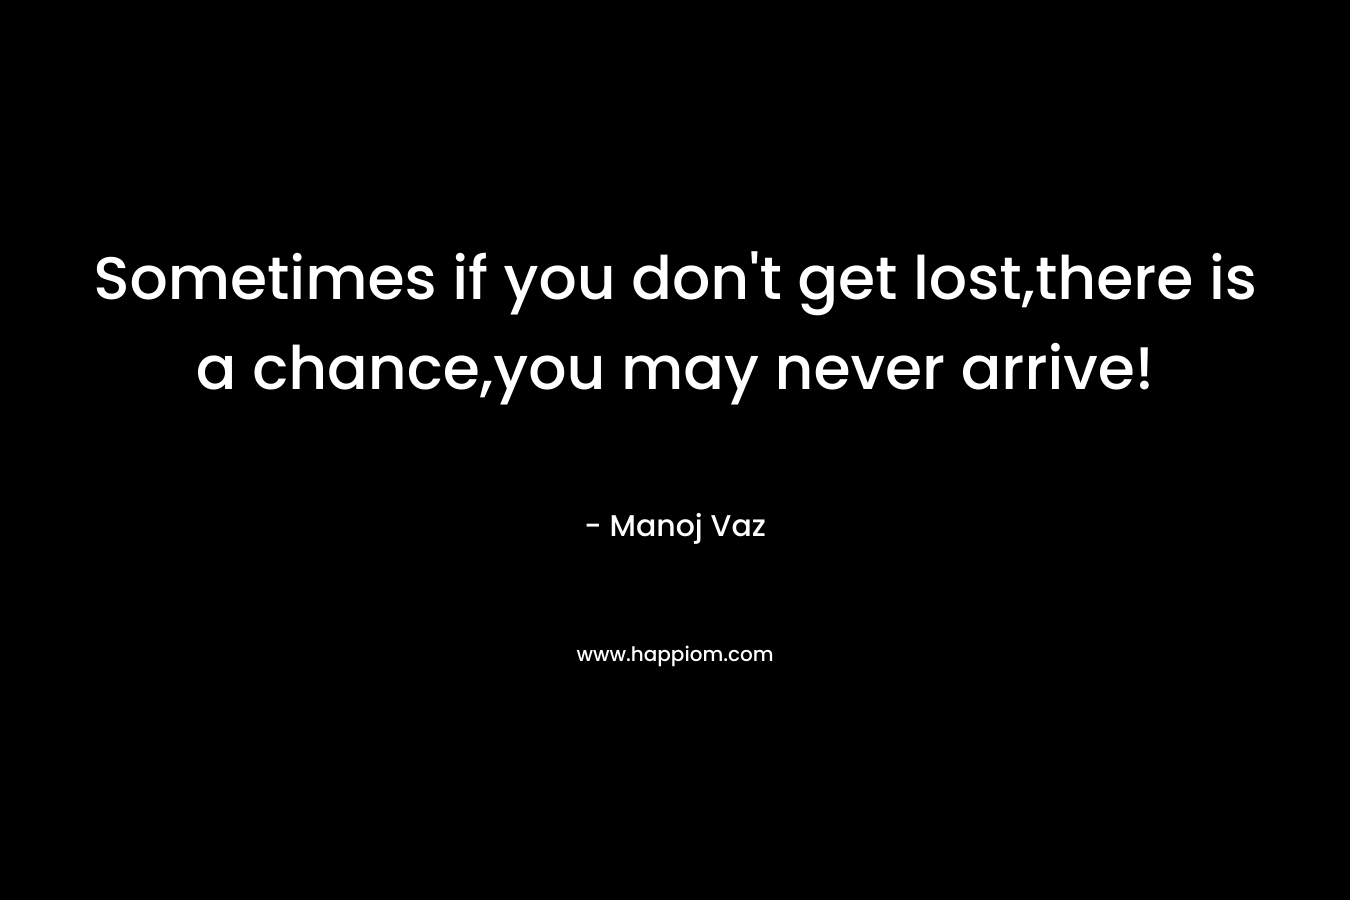 Sometimes if you don't get lost,there is a chance,you may never arrive!